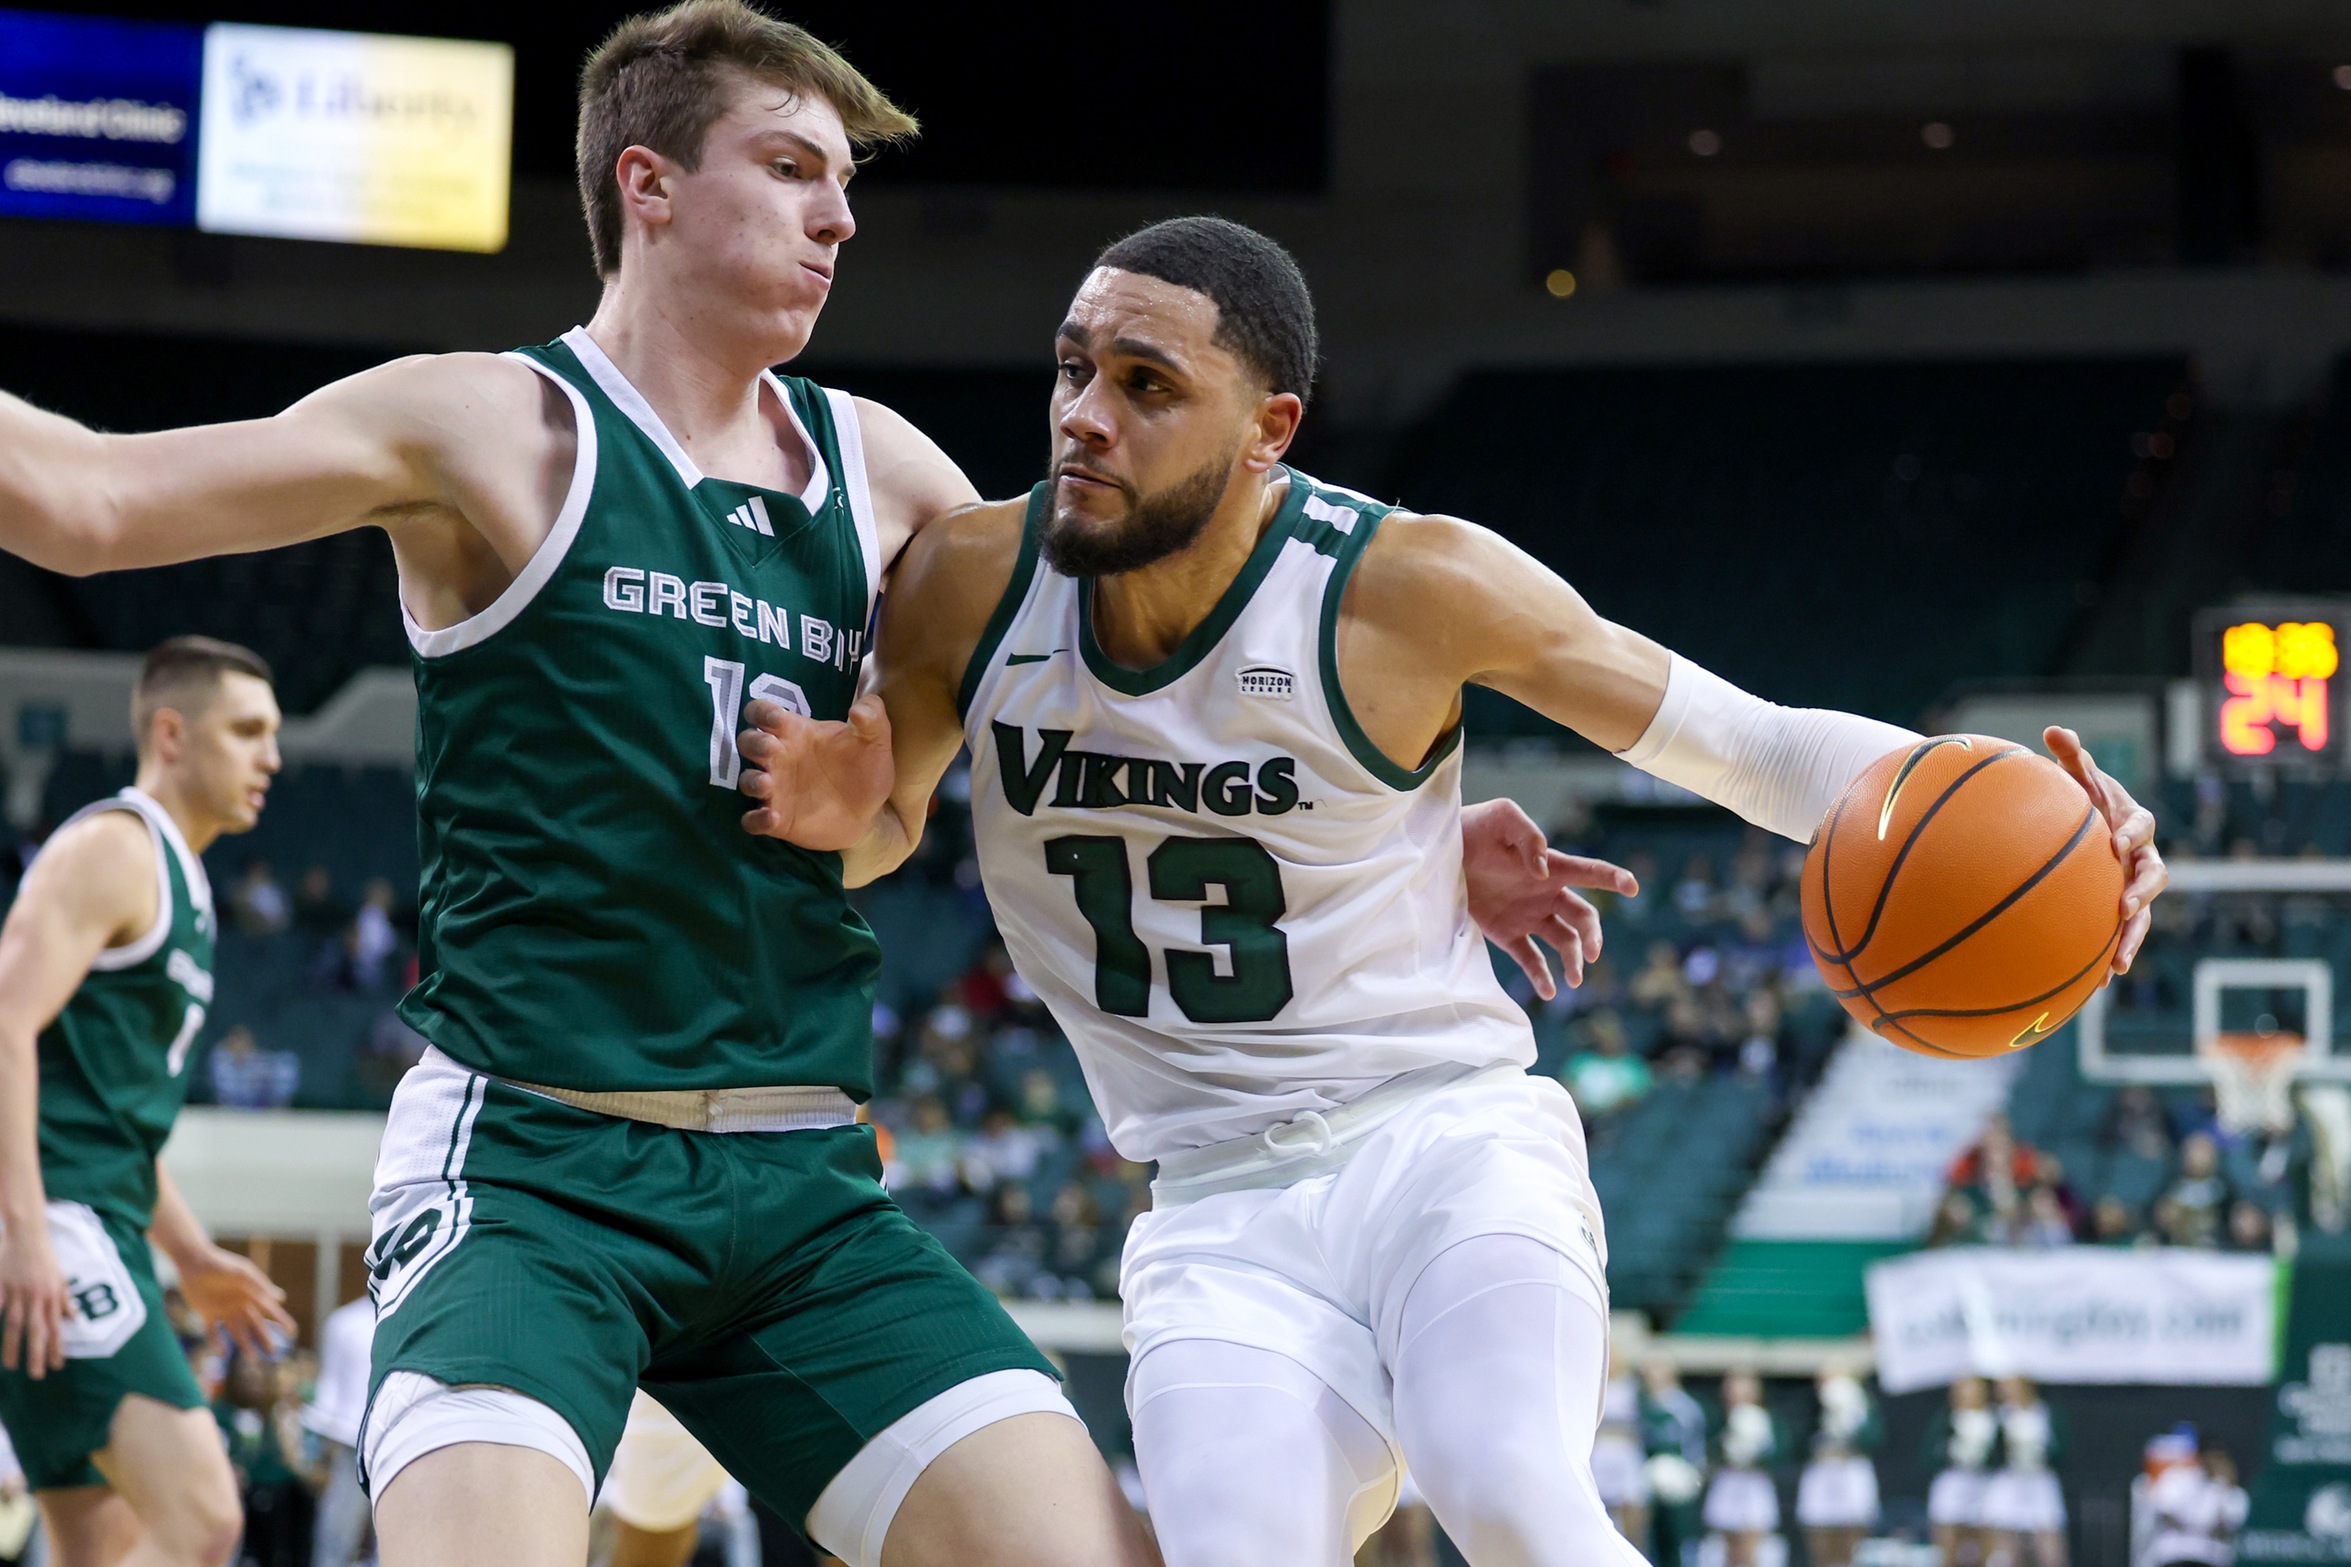 Cleveland State Men’s Basketball Falls to Green Bay